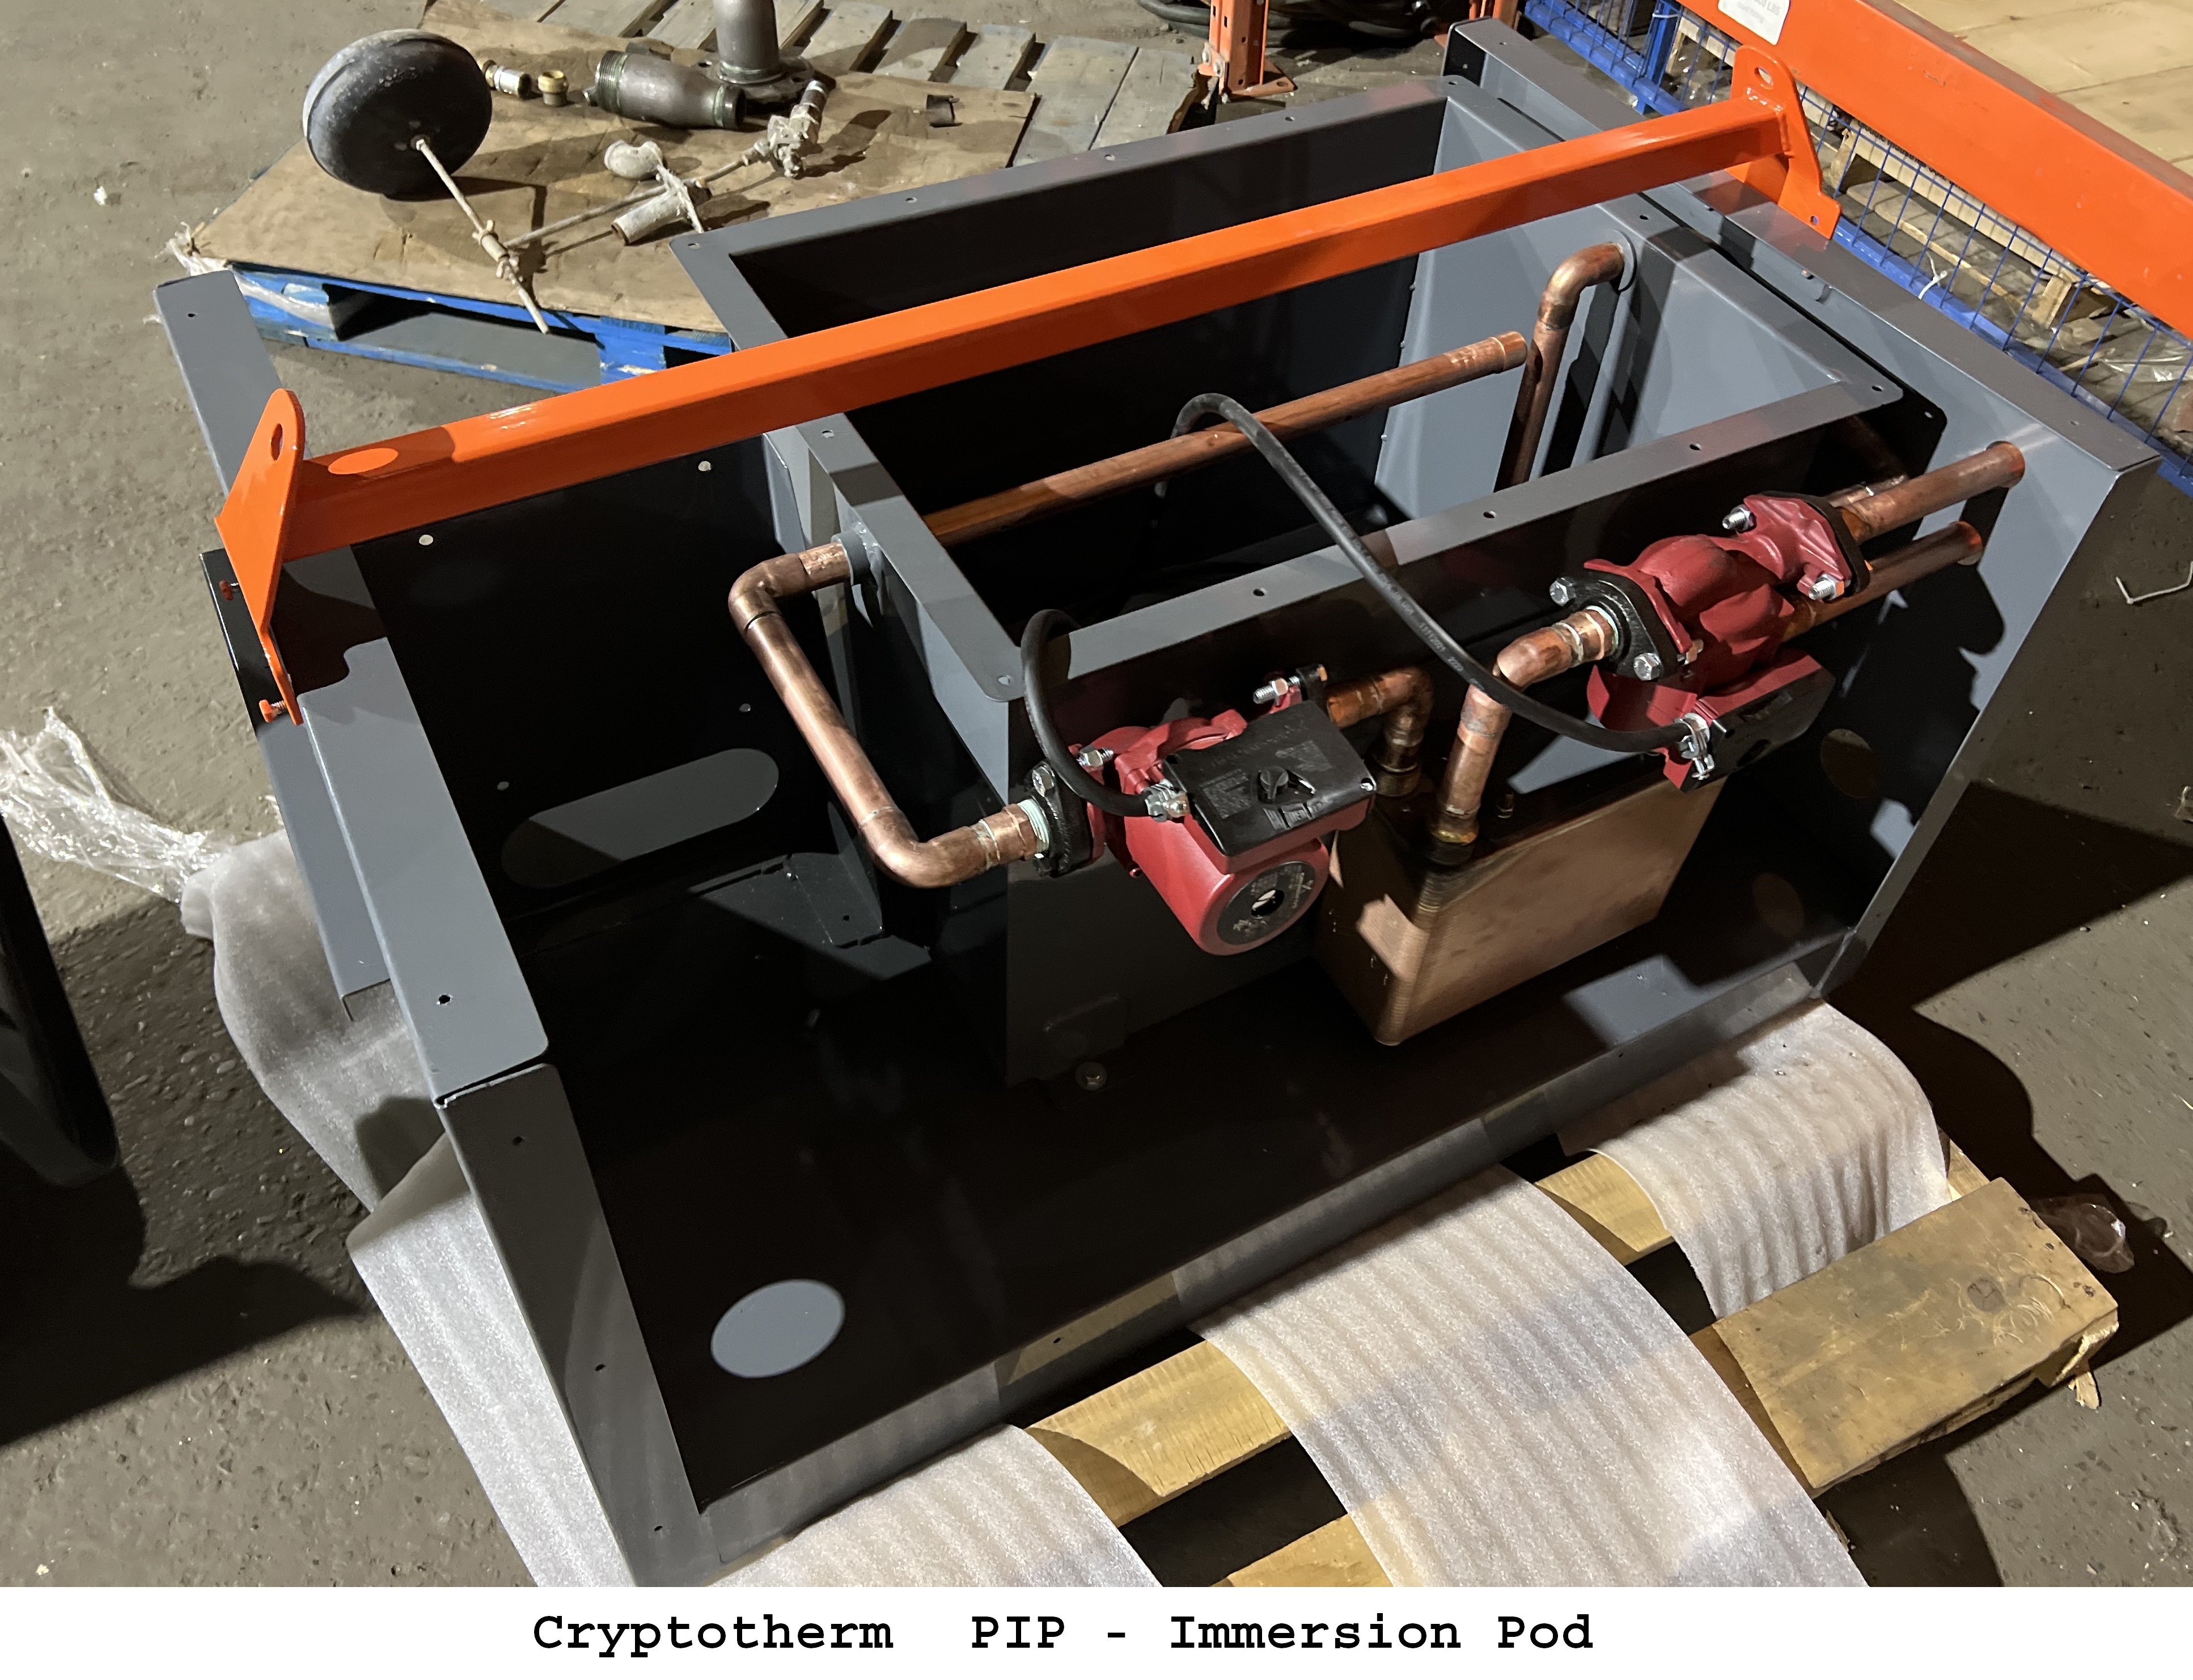 Cryptotherm PIP